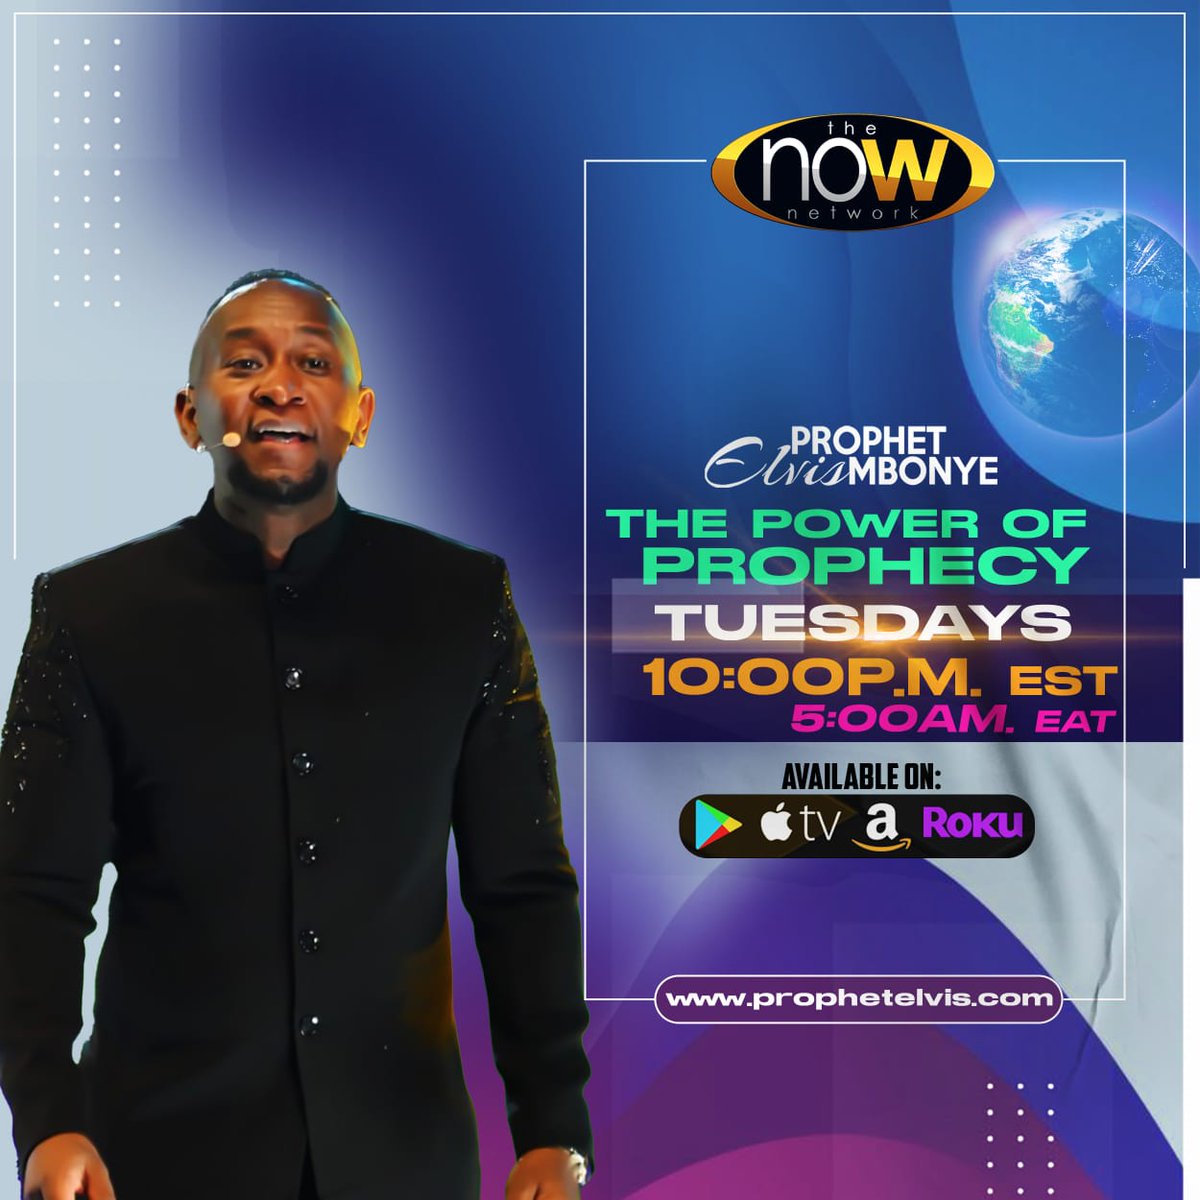 This Tuesday November 07, 2023! Prophet Elvis Mbonye on The NOW Network 10:00 pm Eastern Standard Time (EST)!! Live stream at prophetelvis.com/live #ProphetElvisMbonye